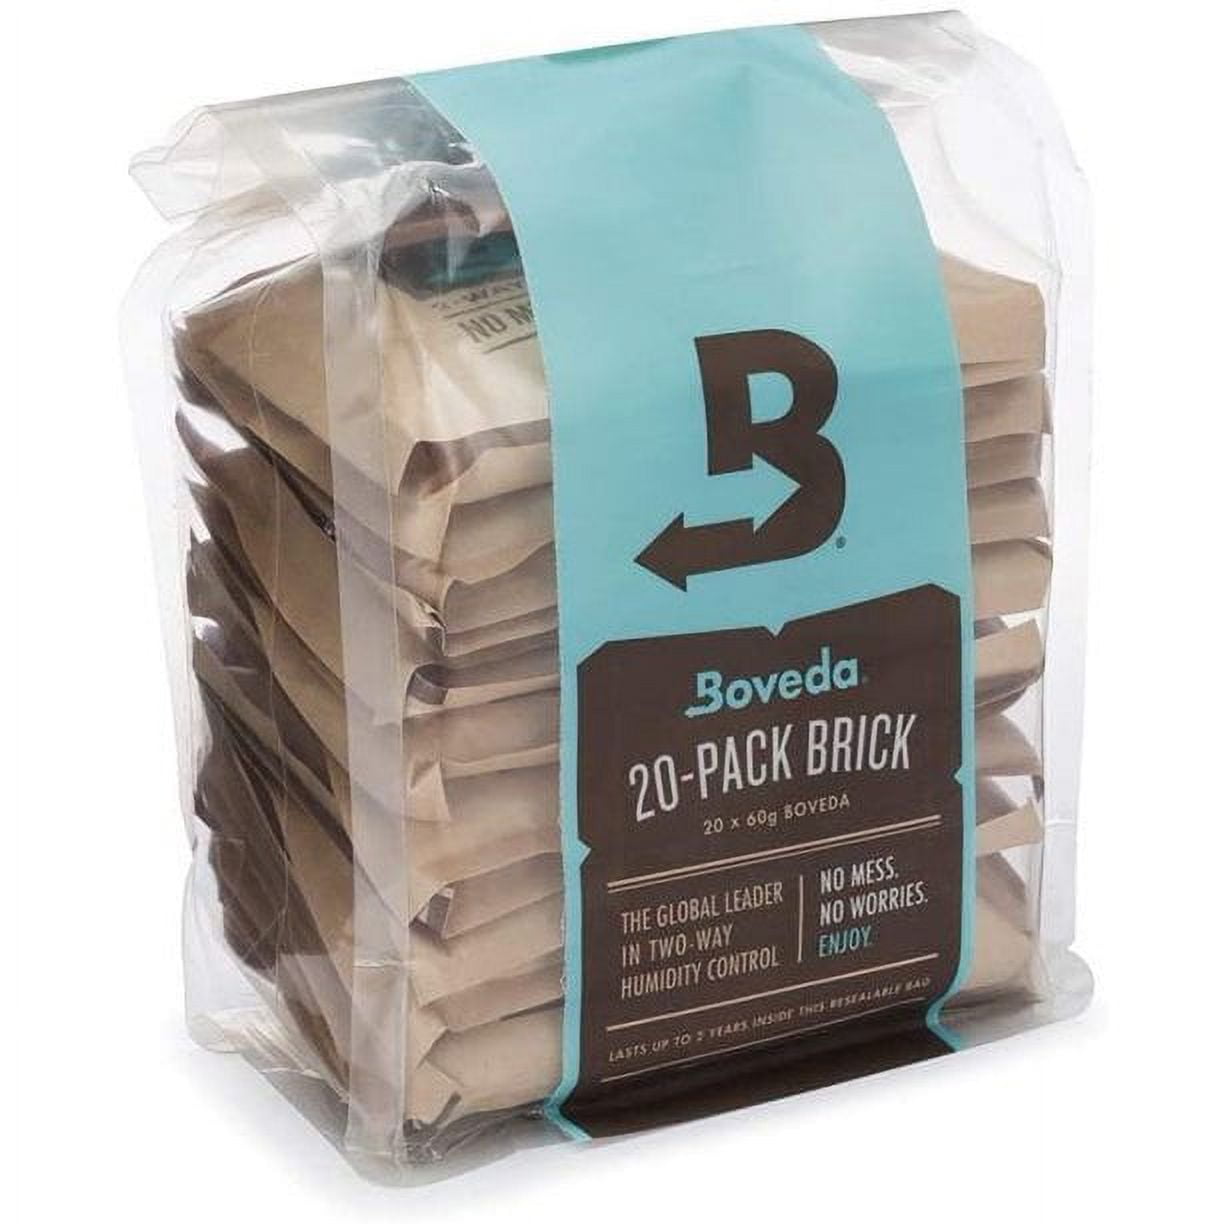 Boveda 69% RH 2-Way Humidity Control – Restores & Maintains Humidity – All  In One Solution For Humidification- Patented Technology for Cigar Humidors  – Convenient & Versatile - 20 Count Resealable Bag 